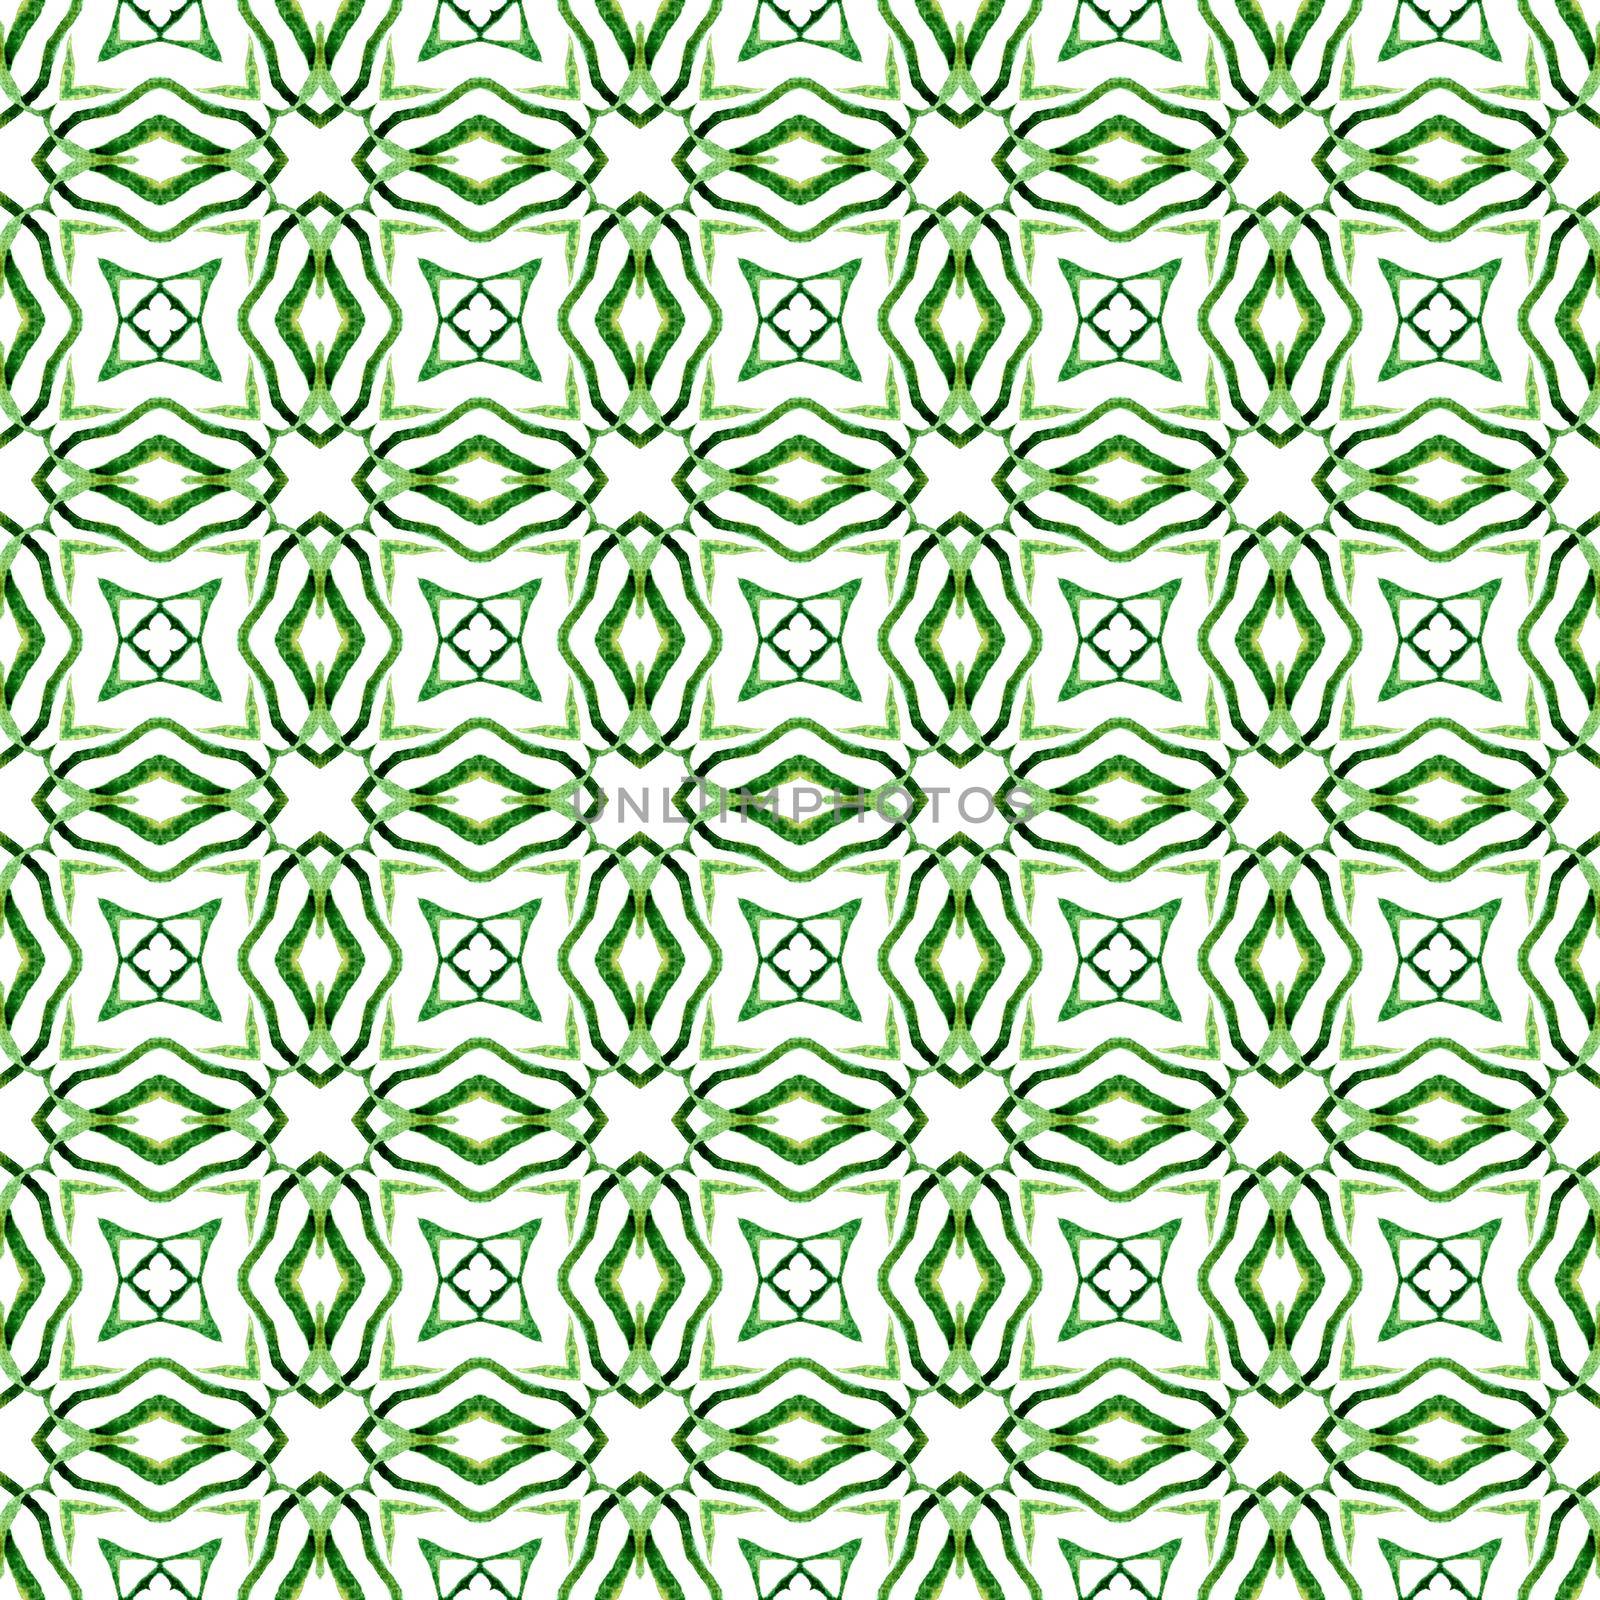 Repeating striped hand drawn border. Green likable boho chic summer design. Textile ready trending print, swimwear fabric, wallpaper, wrapping. Striped hand drawn design.